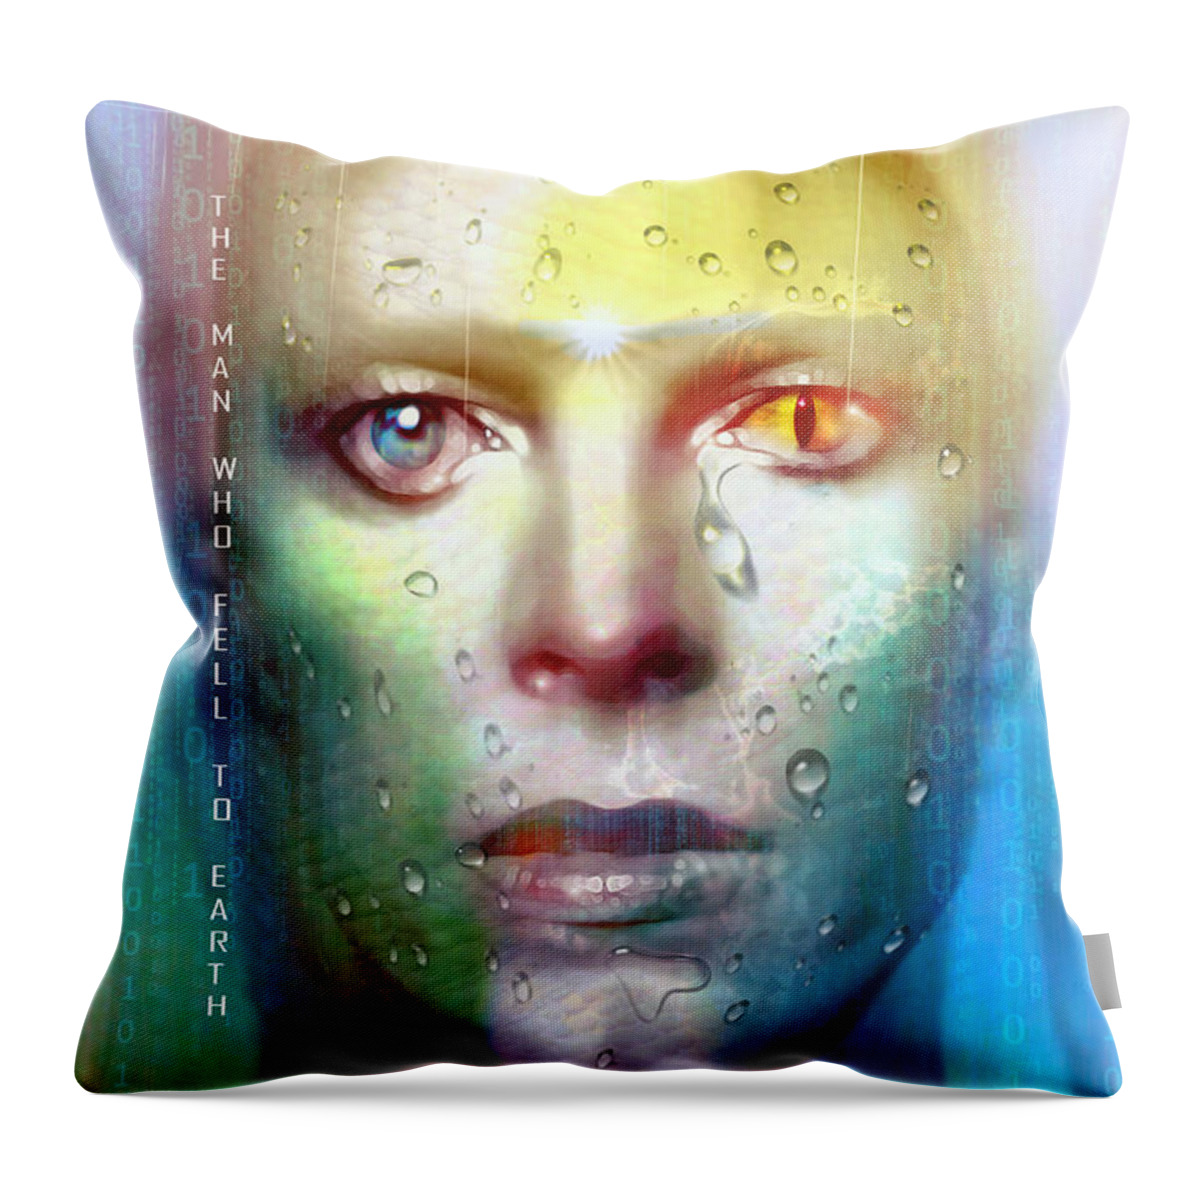 David Bowie Throw Pillow featuring the digital art The Man Who Fell To Earth by Mal Bray